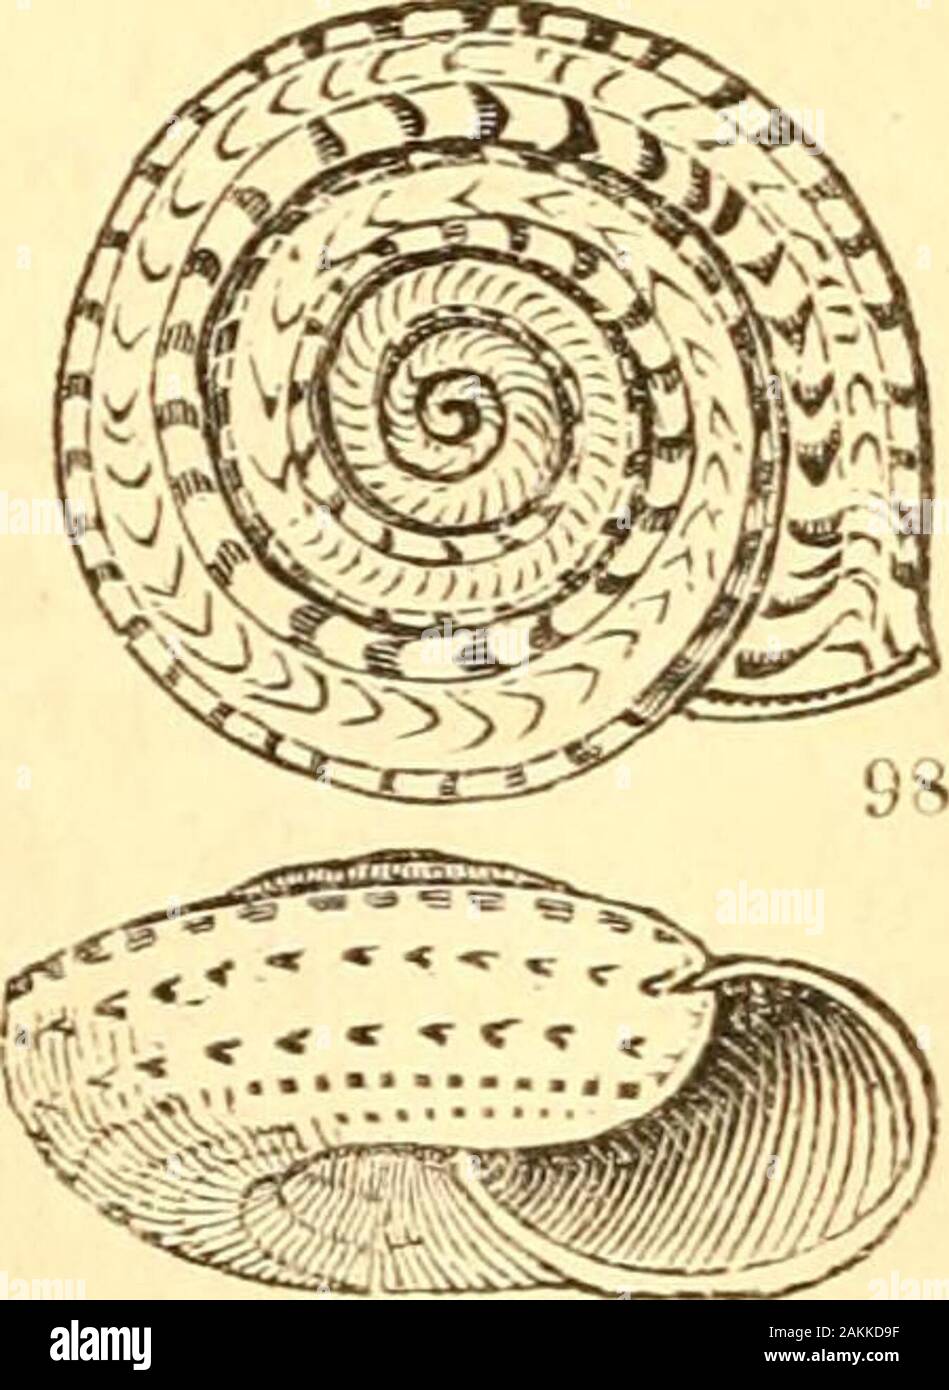 A treatise on malacology; or, Shells and shell fish . fasciata. En. Meth. 461. f. 7. Helicella Feruss. Shell discoid,but the body-whorl thick andventricose ; the spire very smalland sunk ; pillar none; aperturesemicircular ; outer lip thickened;umbilicus very wide. (^^. 98.) pellis-serpentis ( ^^. 98.); also Fer.MoUus. pi. 66. 73. 75. 77.. S34&gt; SHELLS AND SHELL-FISH. PART II. SuB-FAM. 4. ACHATIN^. Shell spiral; aperture oblong or oval, always equal, andgenerally shorter than the spire.* Clausilia Drap. Aperture oblong, with teeth on bothsides t; shell cylindrical. Pupella Sw. X Spire modera Stock Photo